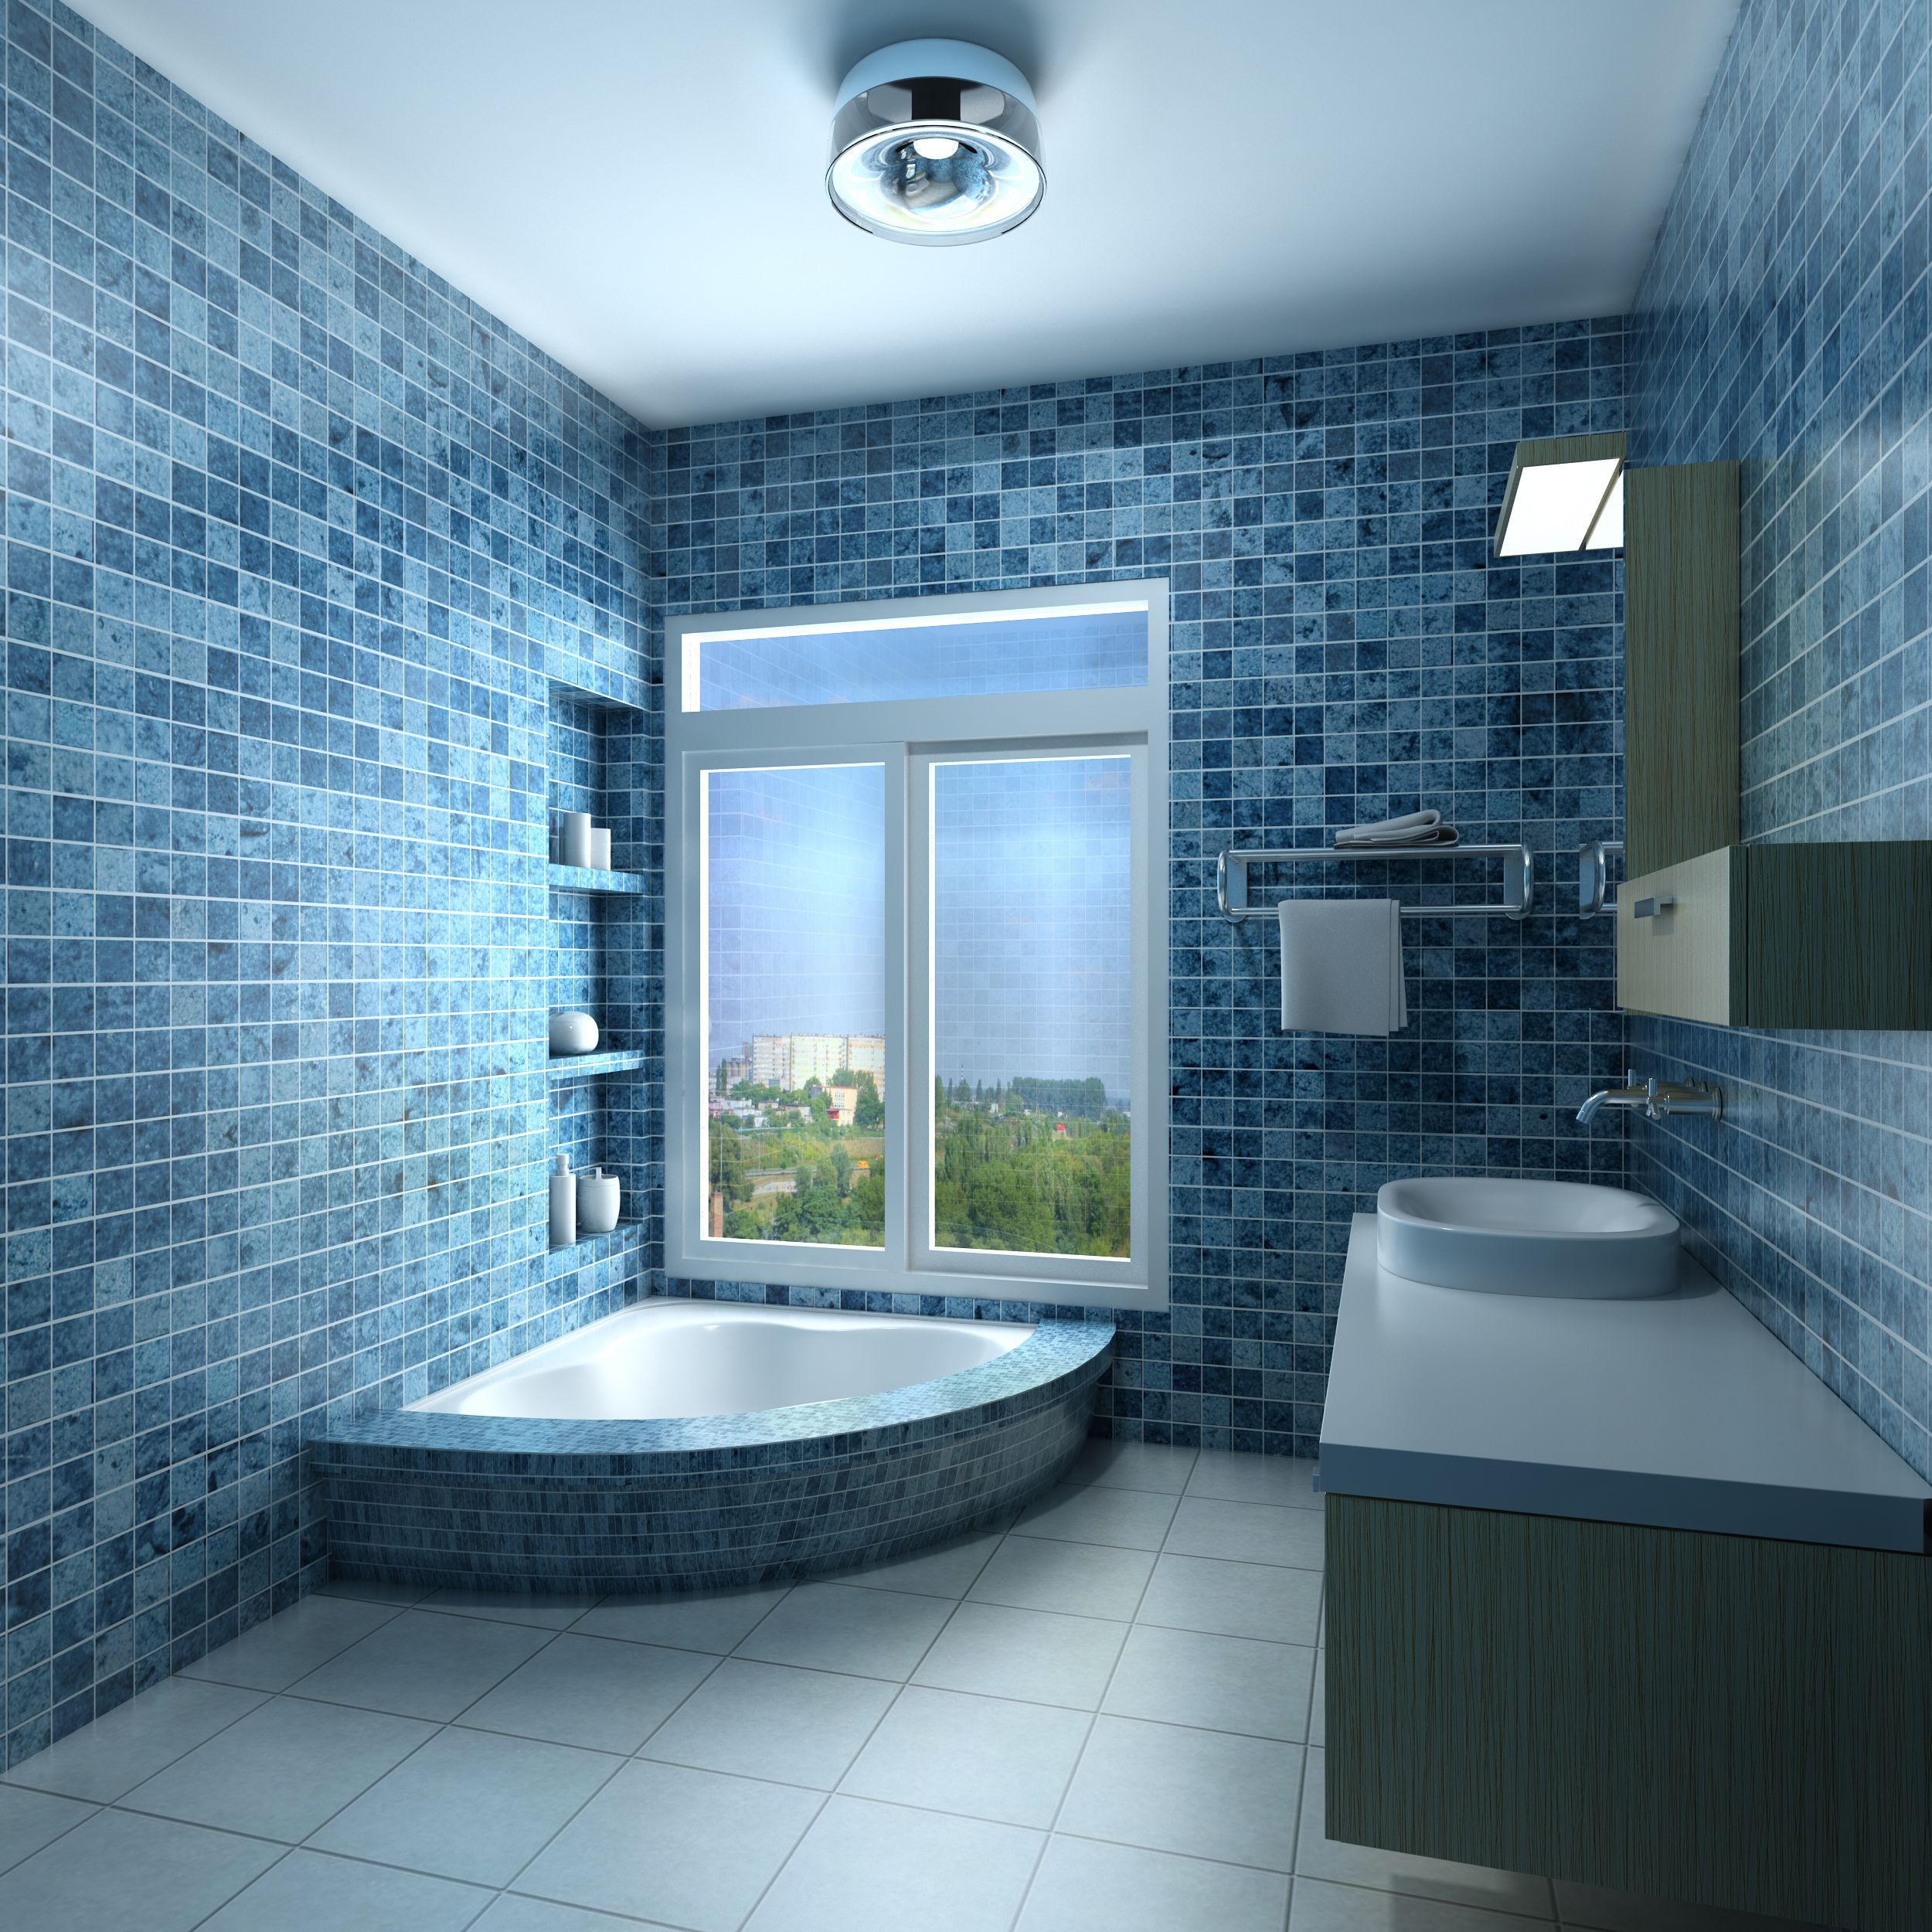 How to Achieve the Stellar Bathroom Remodel Bethesda Consumers Dream Of